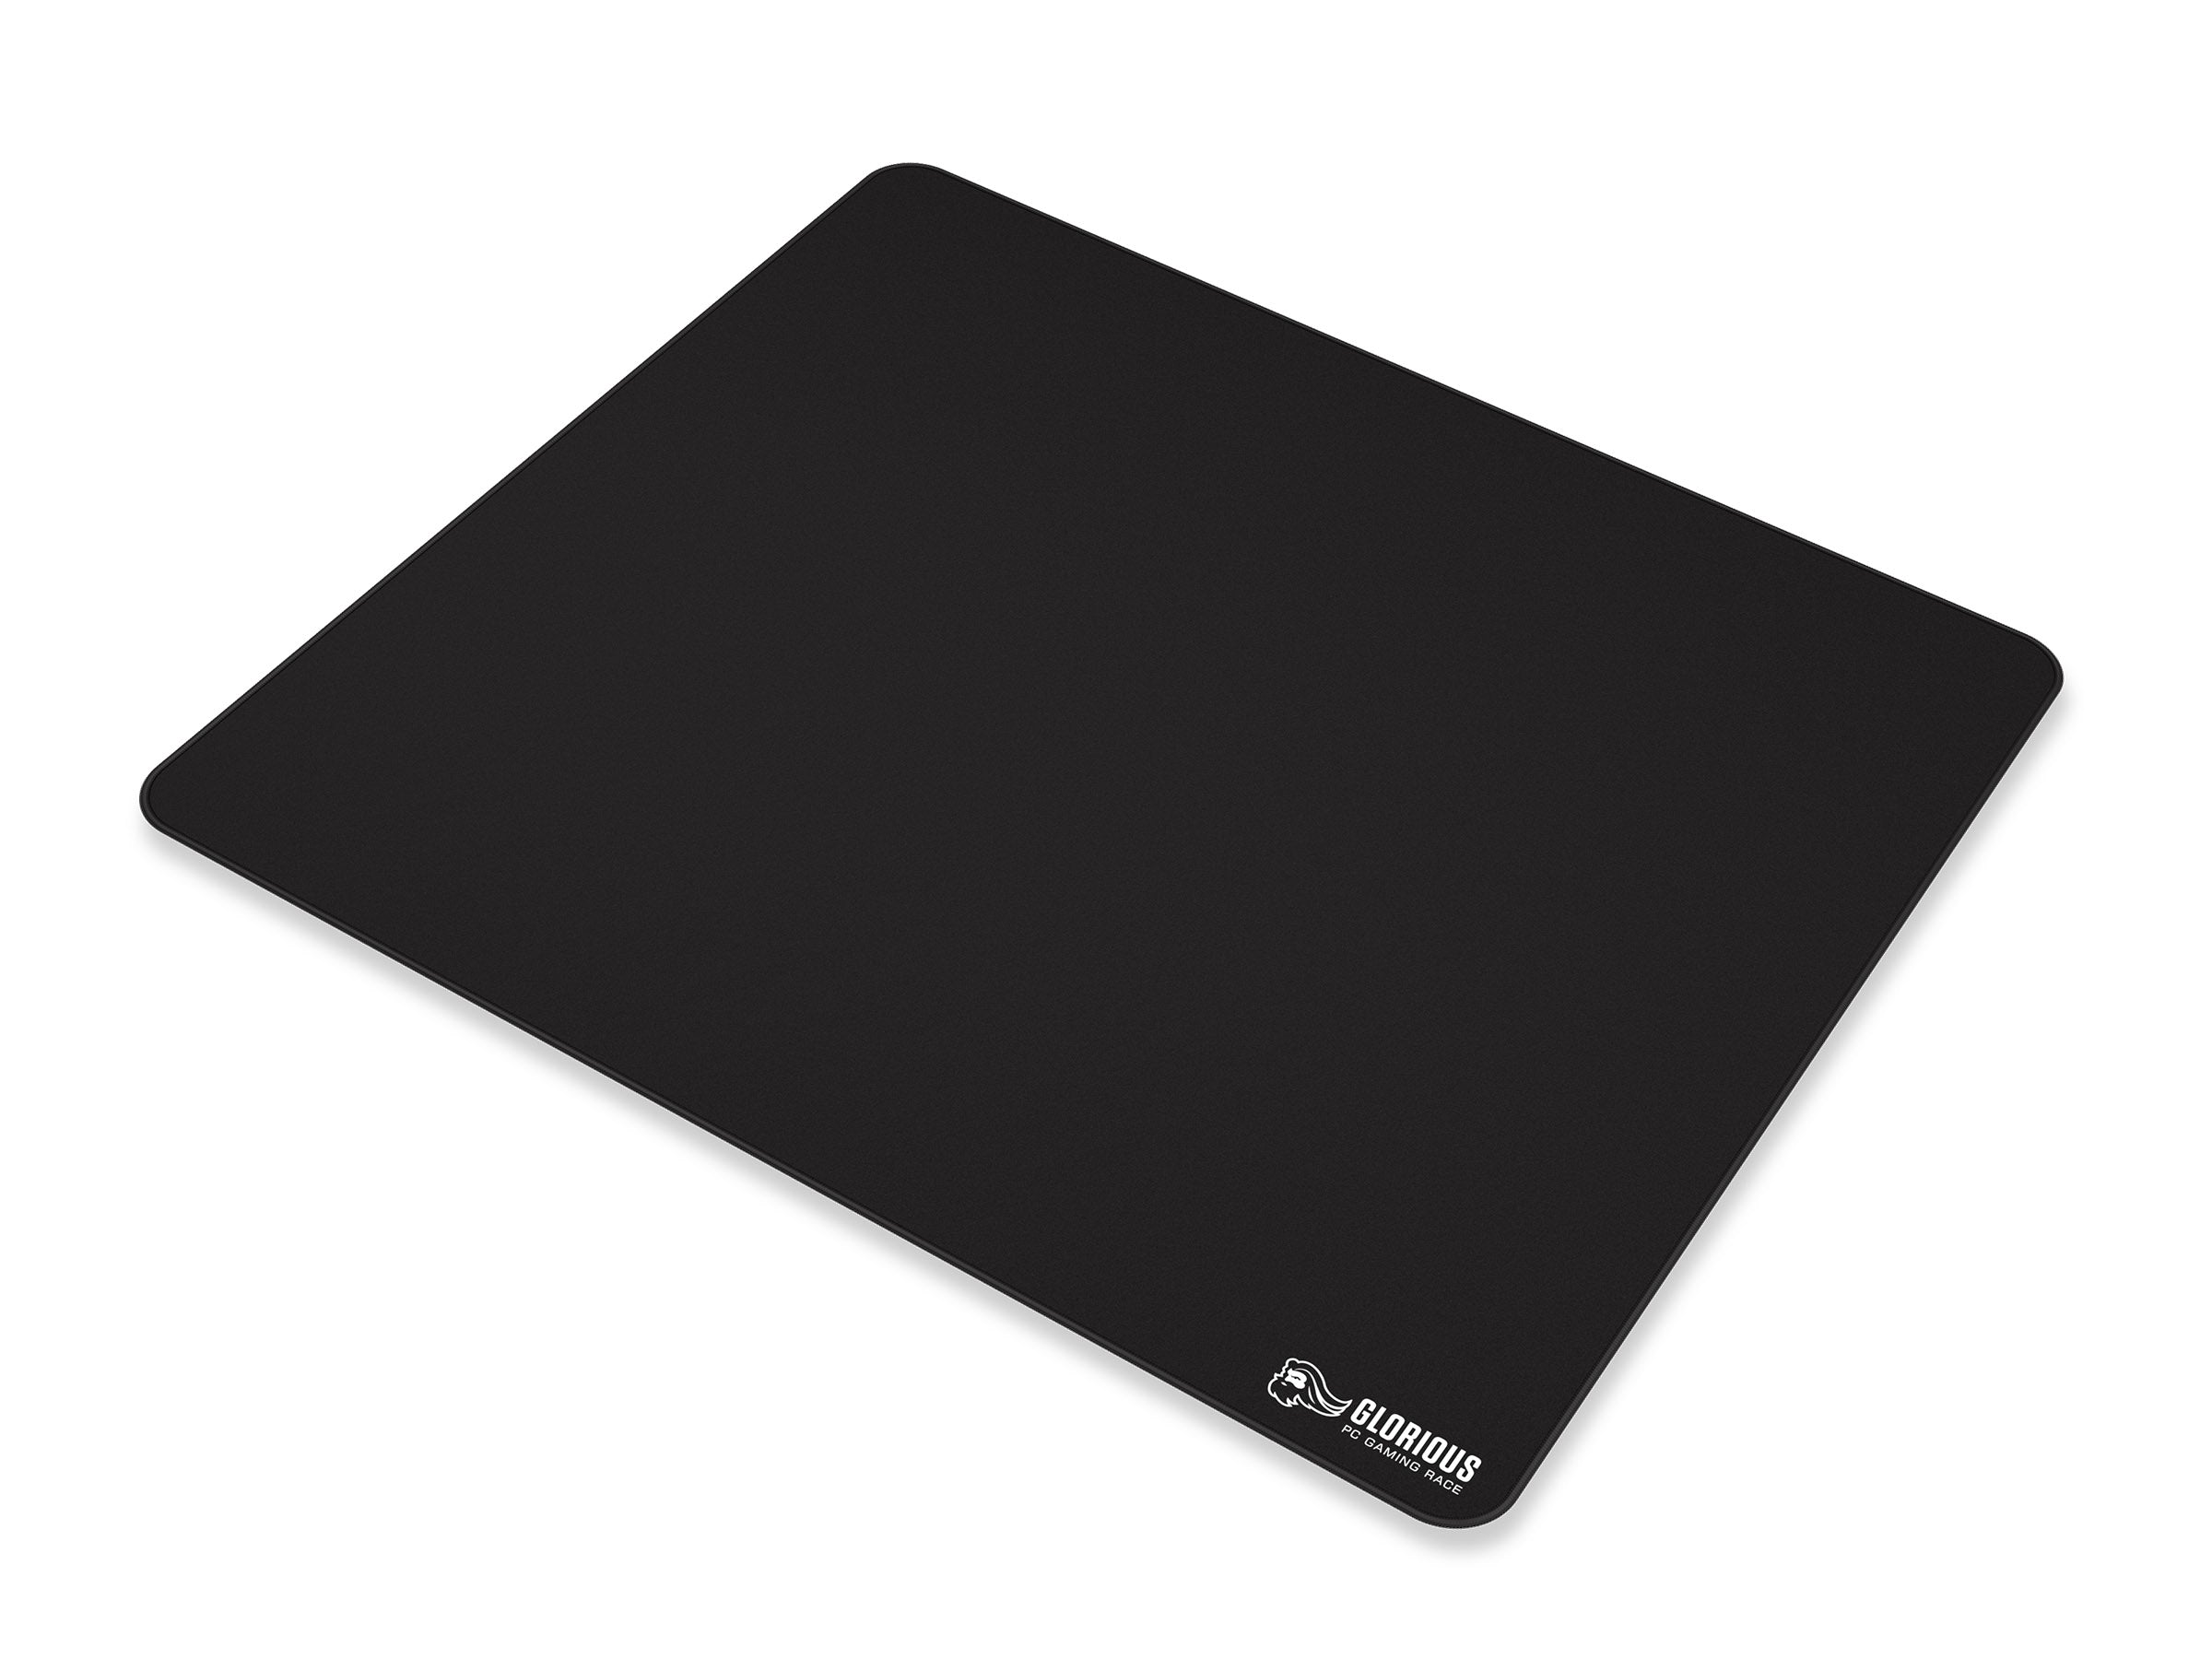 Glorious PC XL Heavy Black Desk / Mouse Pad MKBWRG4711 |27432|